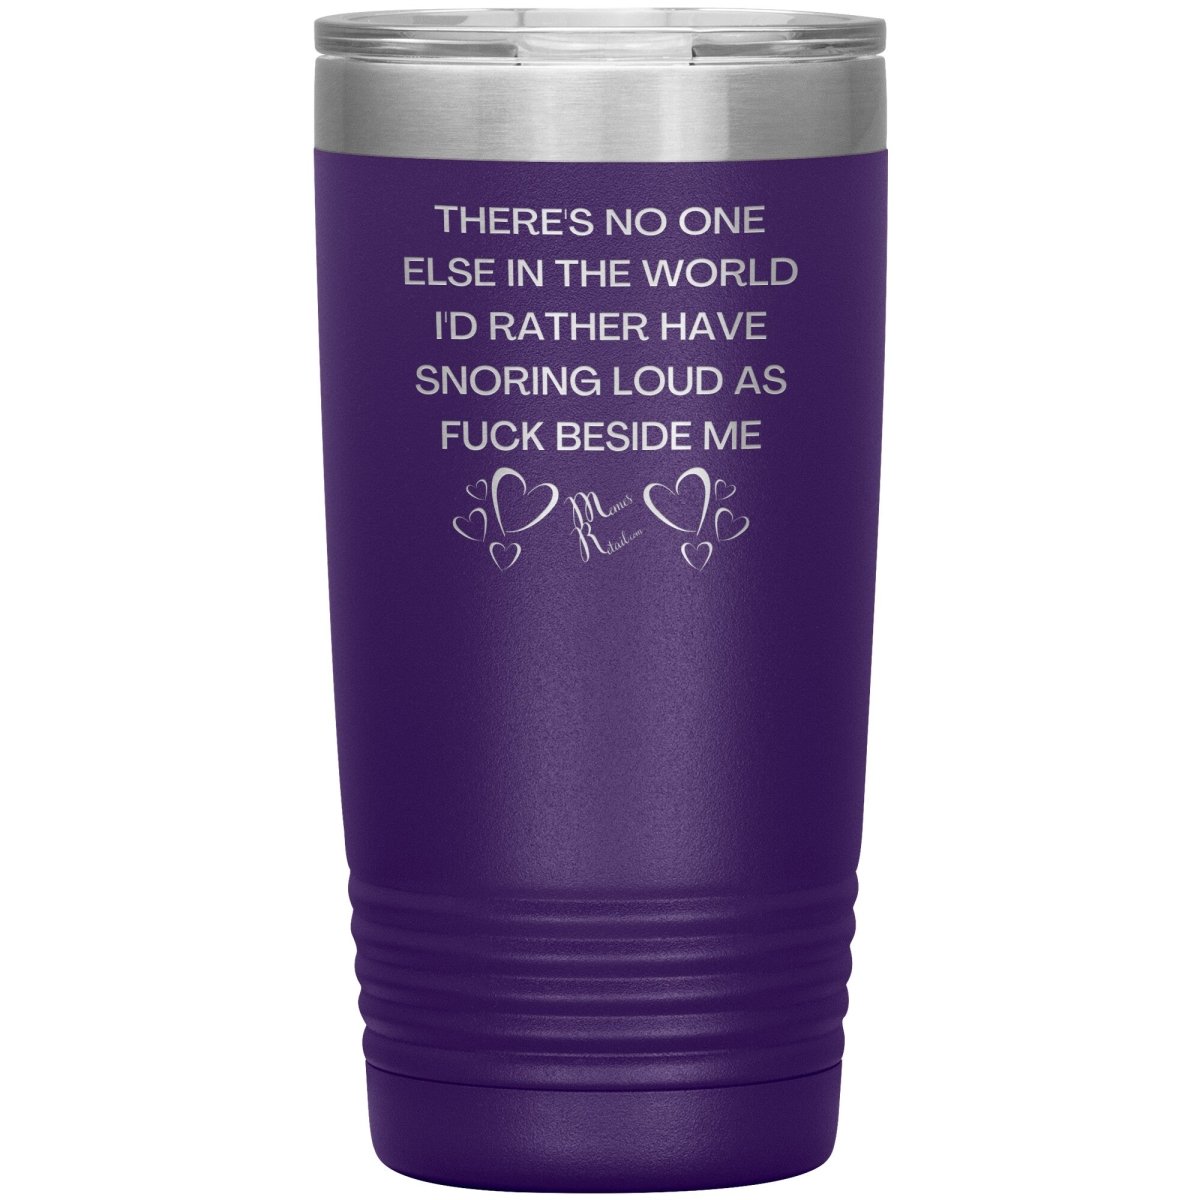 There's No One Else in the World I'd Rather Have Snoring Loud, 20oz Insulated Tumbler / Purple - MemesRetail.com